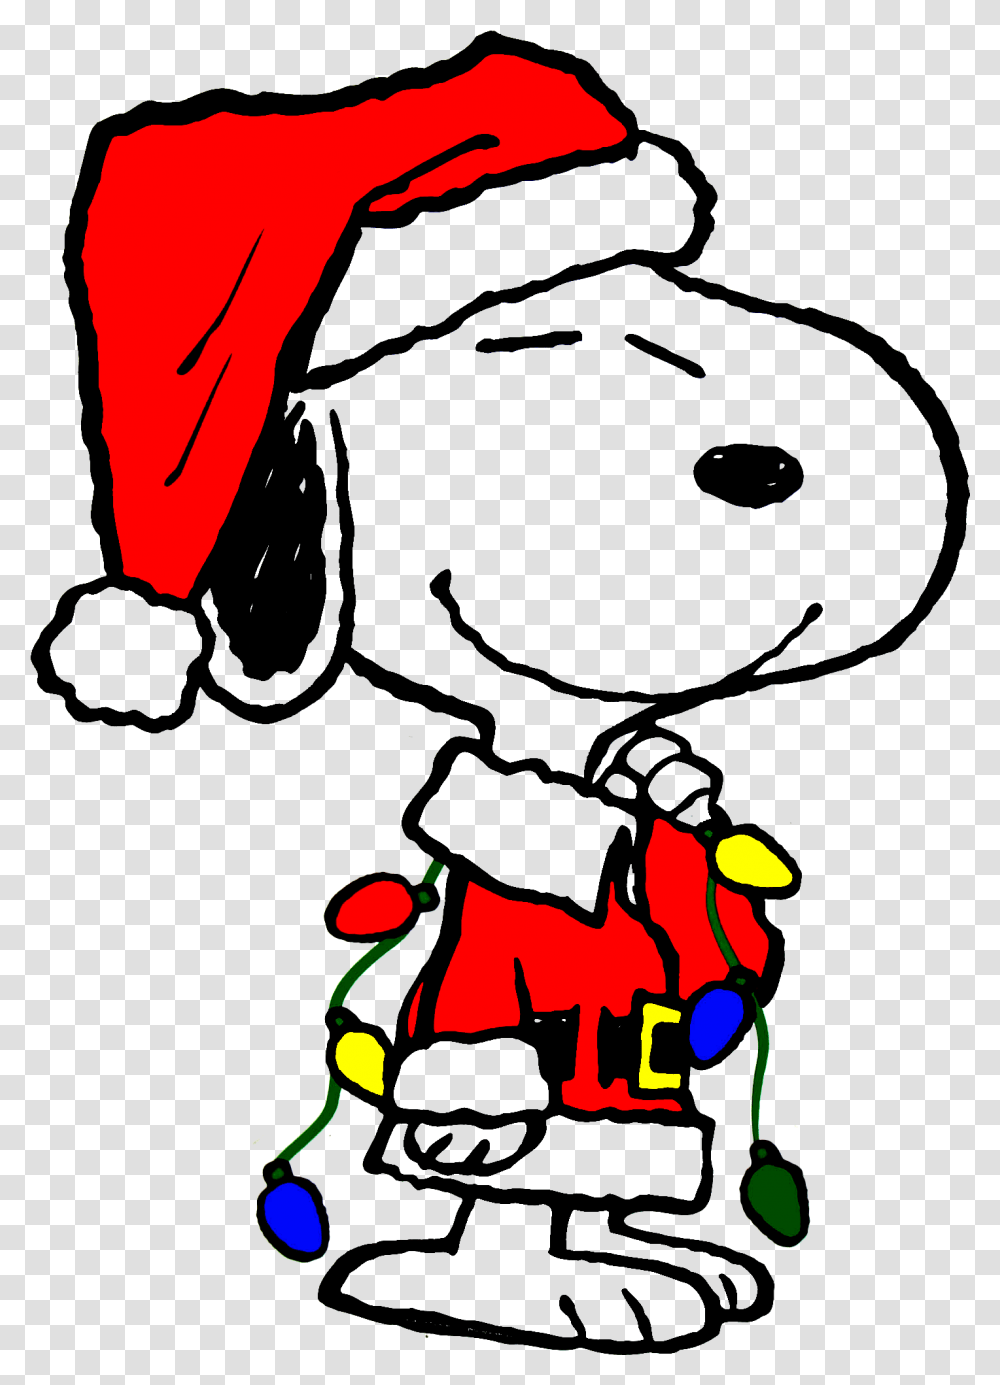 Snoopy Christmas Windows Decor Window Clings Christmas Clip Art Snoopy Christmas, Modern Art, Light Transparent Png